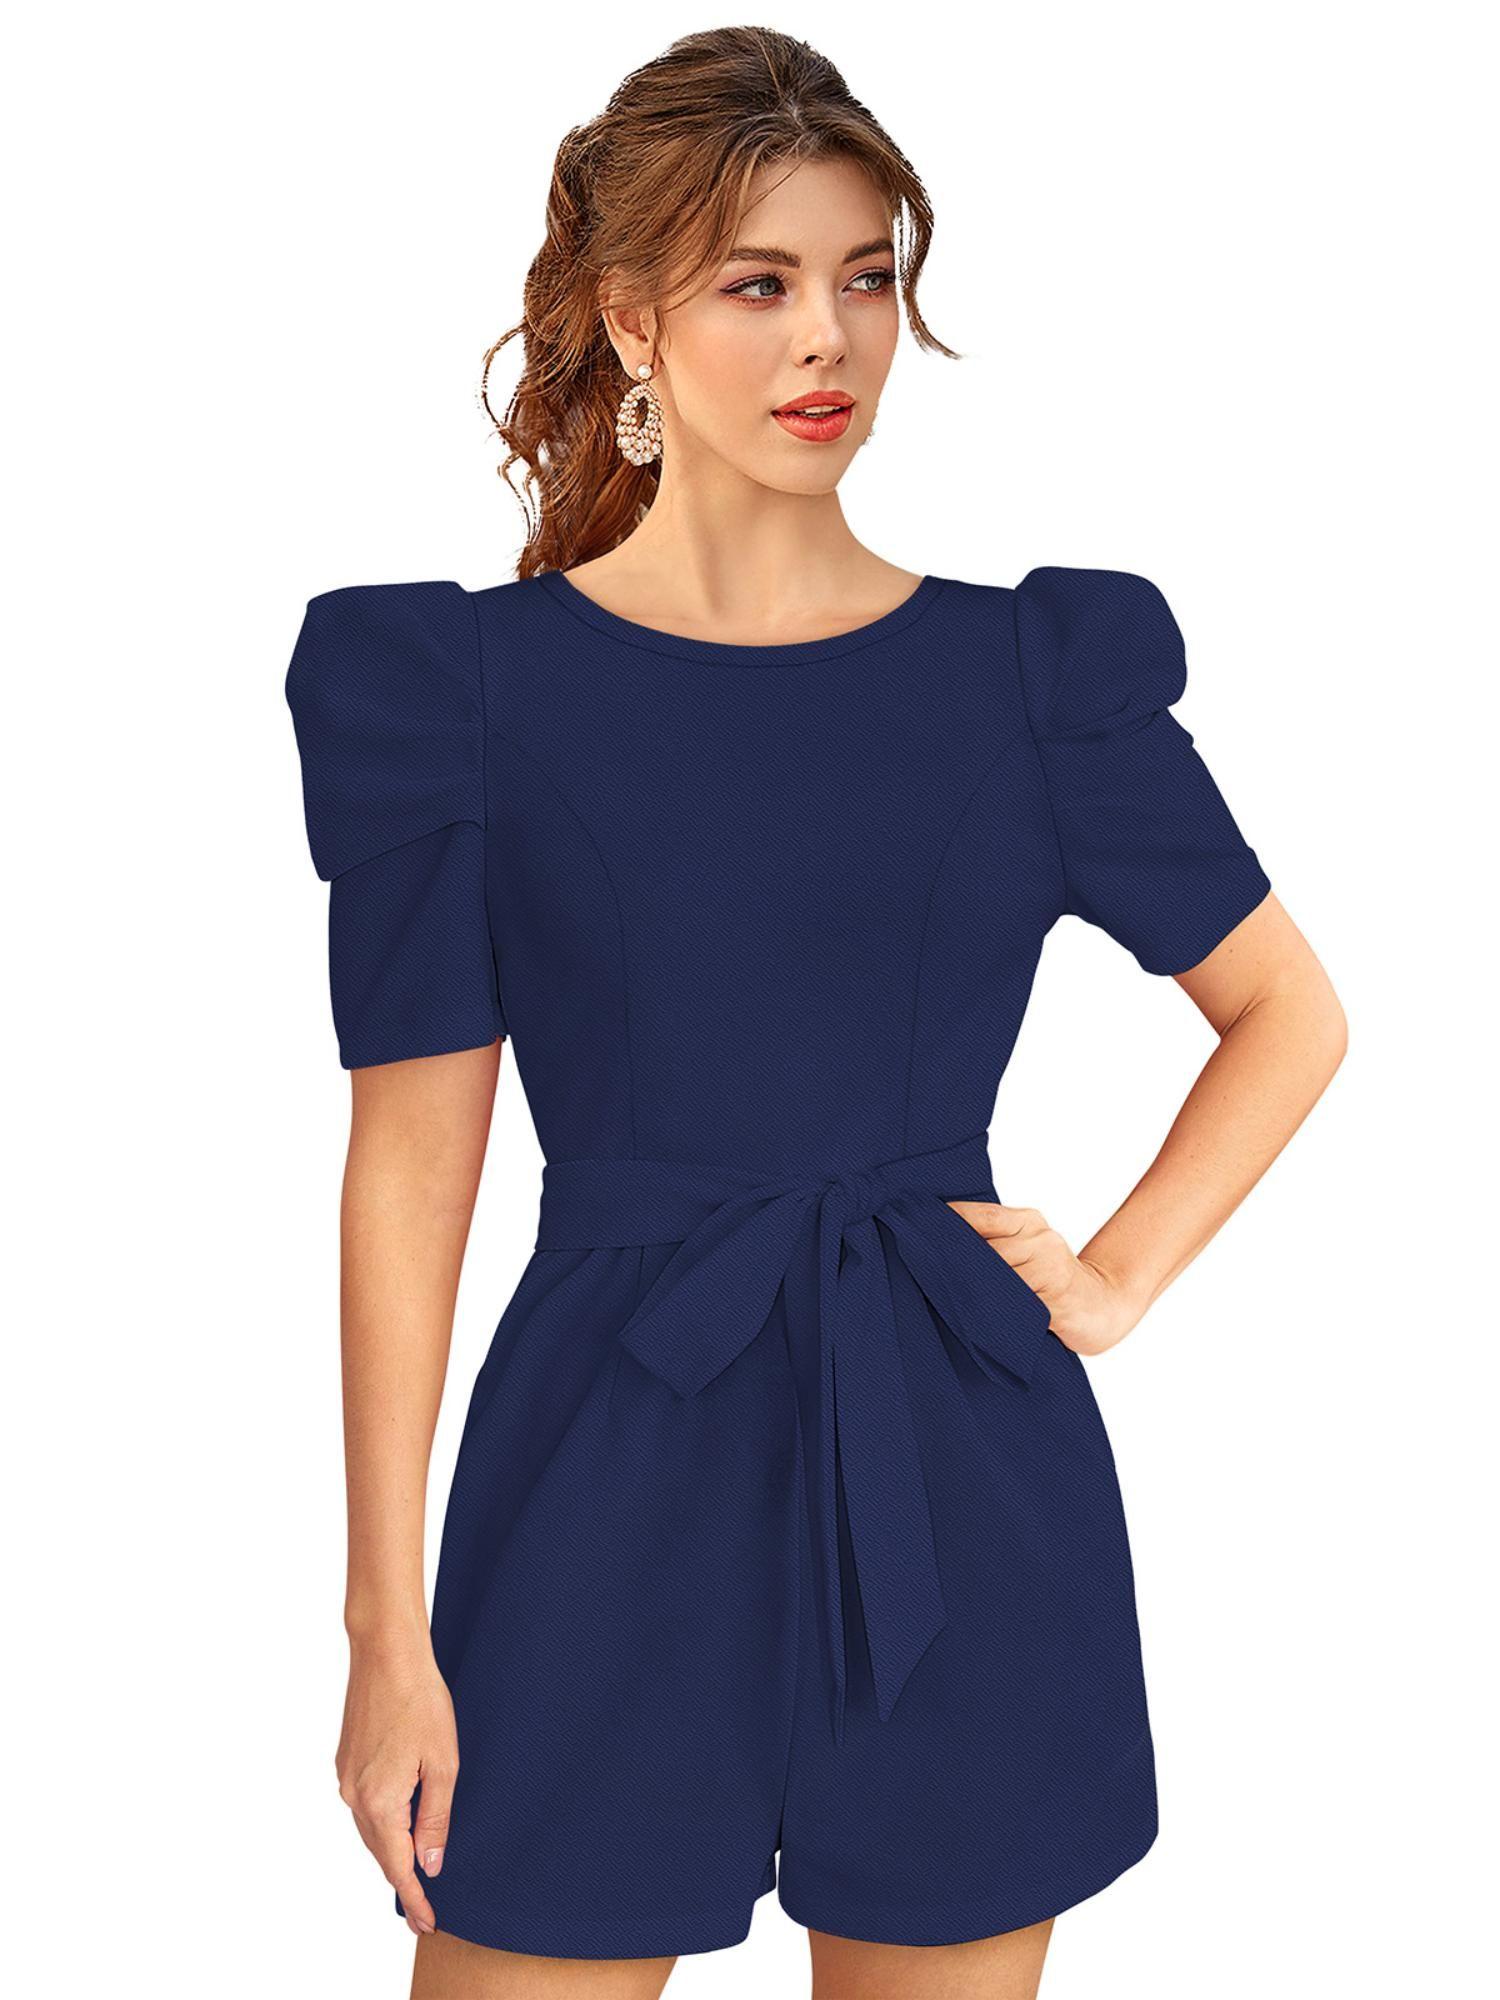 blue knit fabric playsuit for women